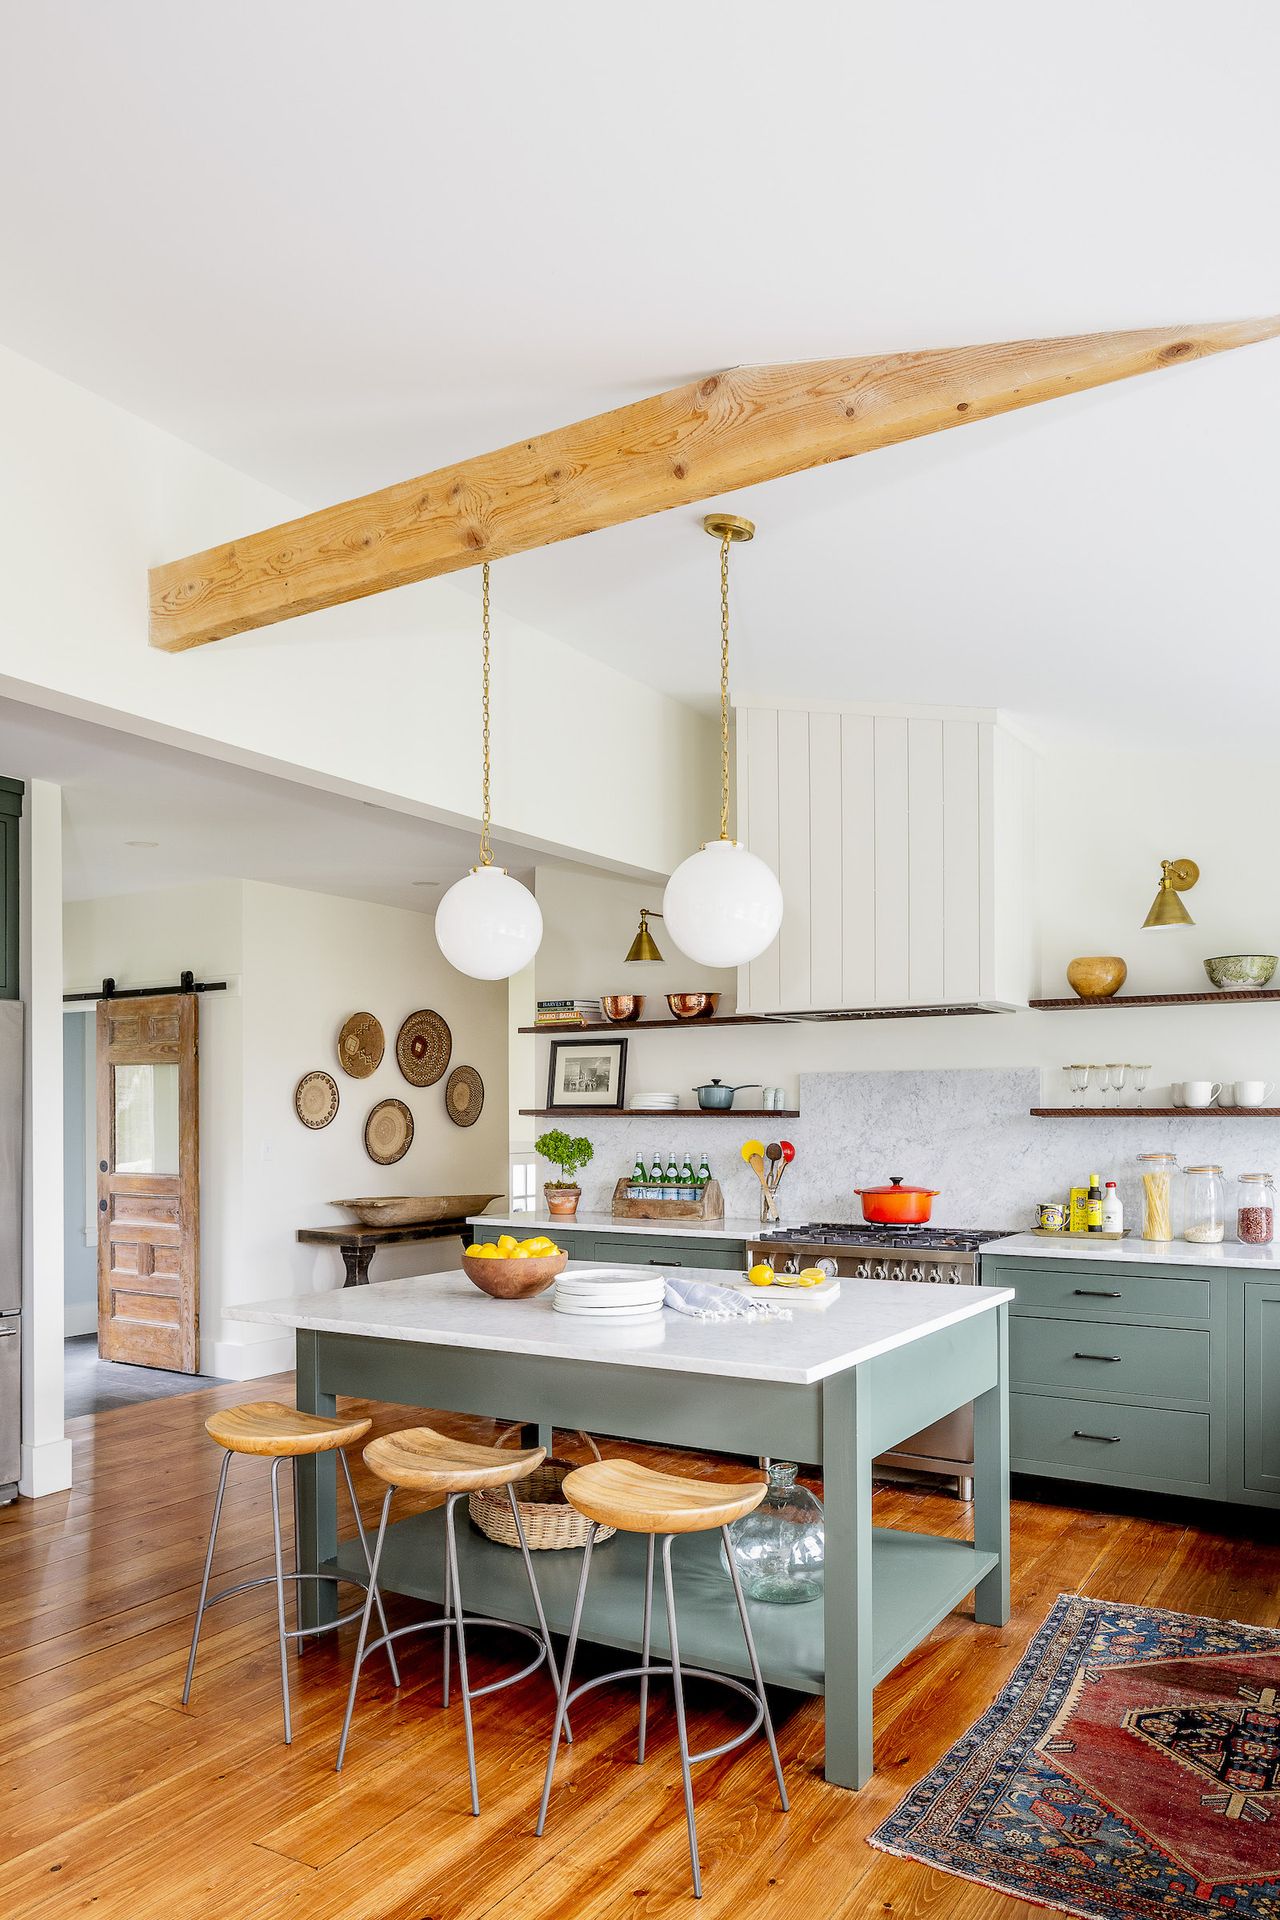 How do I make my kitchen look farmhouse? 12 elements experts always ...